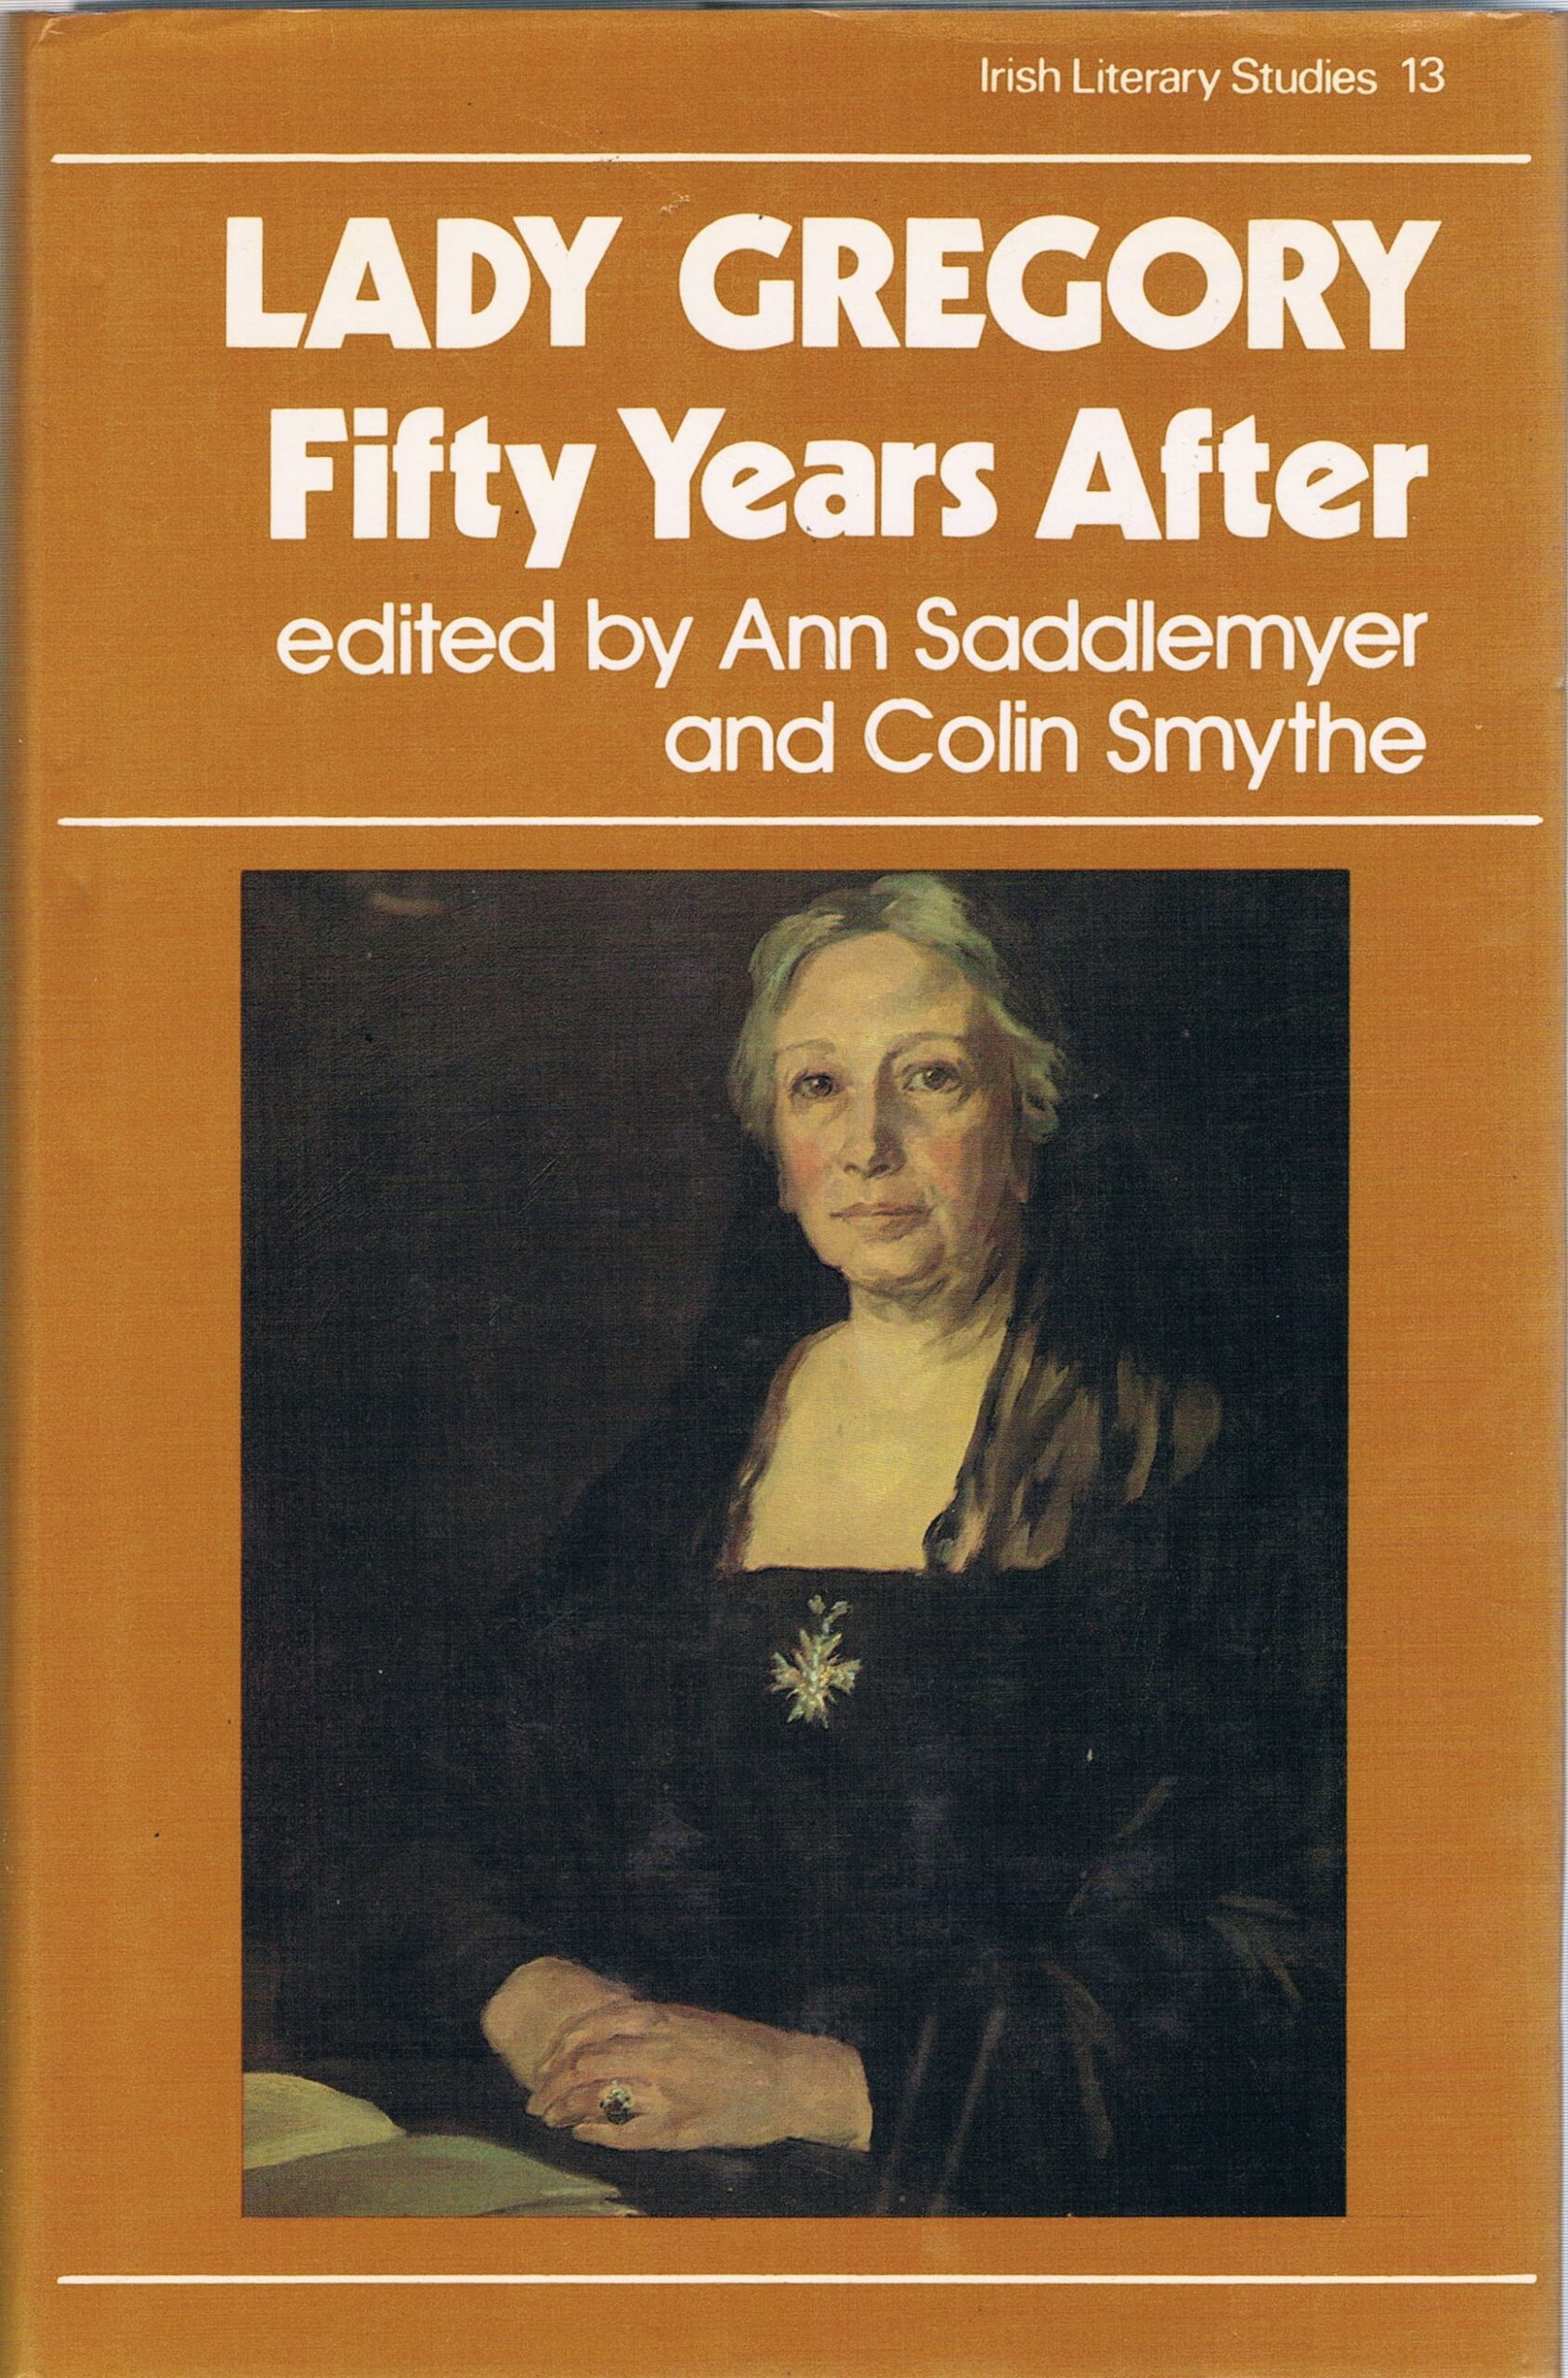 Lady Gregory Fifty Years After by Ann Saddlemyer & Colin Smyth